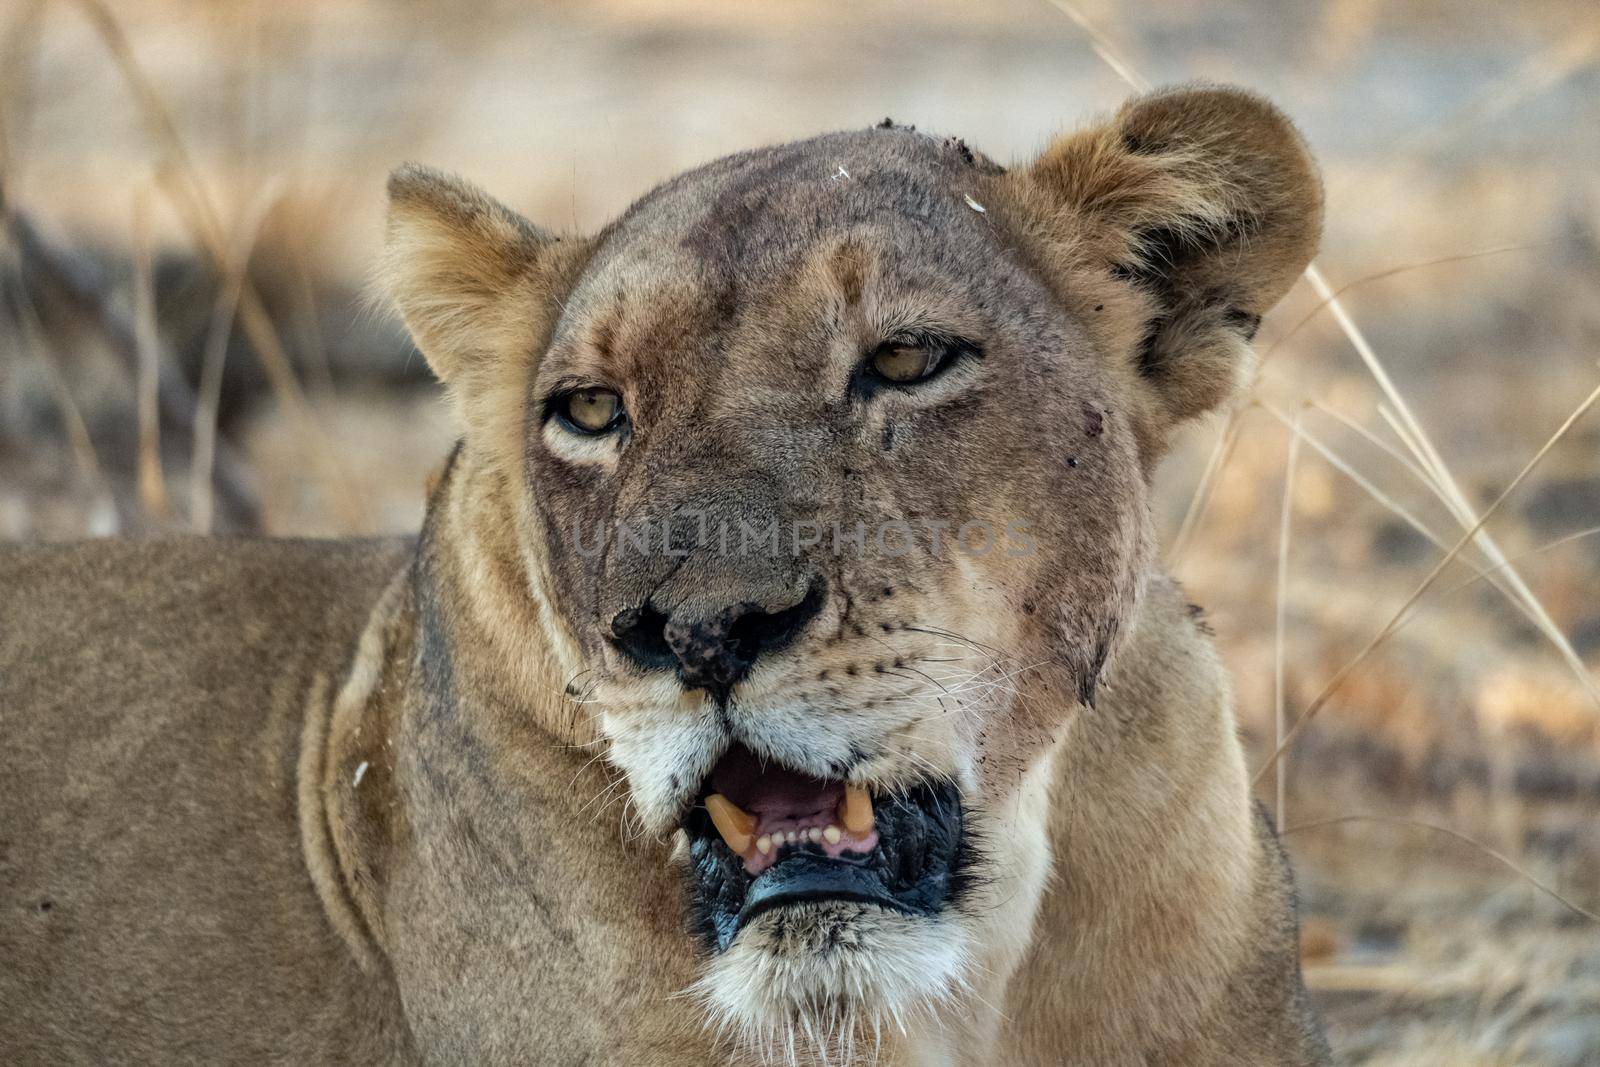 A close-up of a beautiful lioness resting after hunting